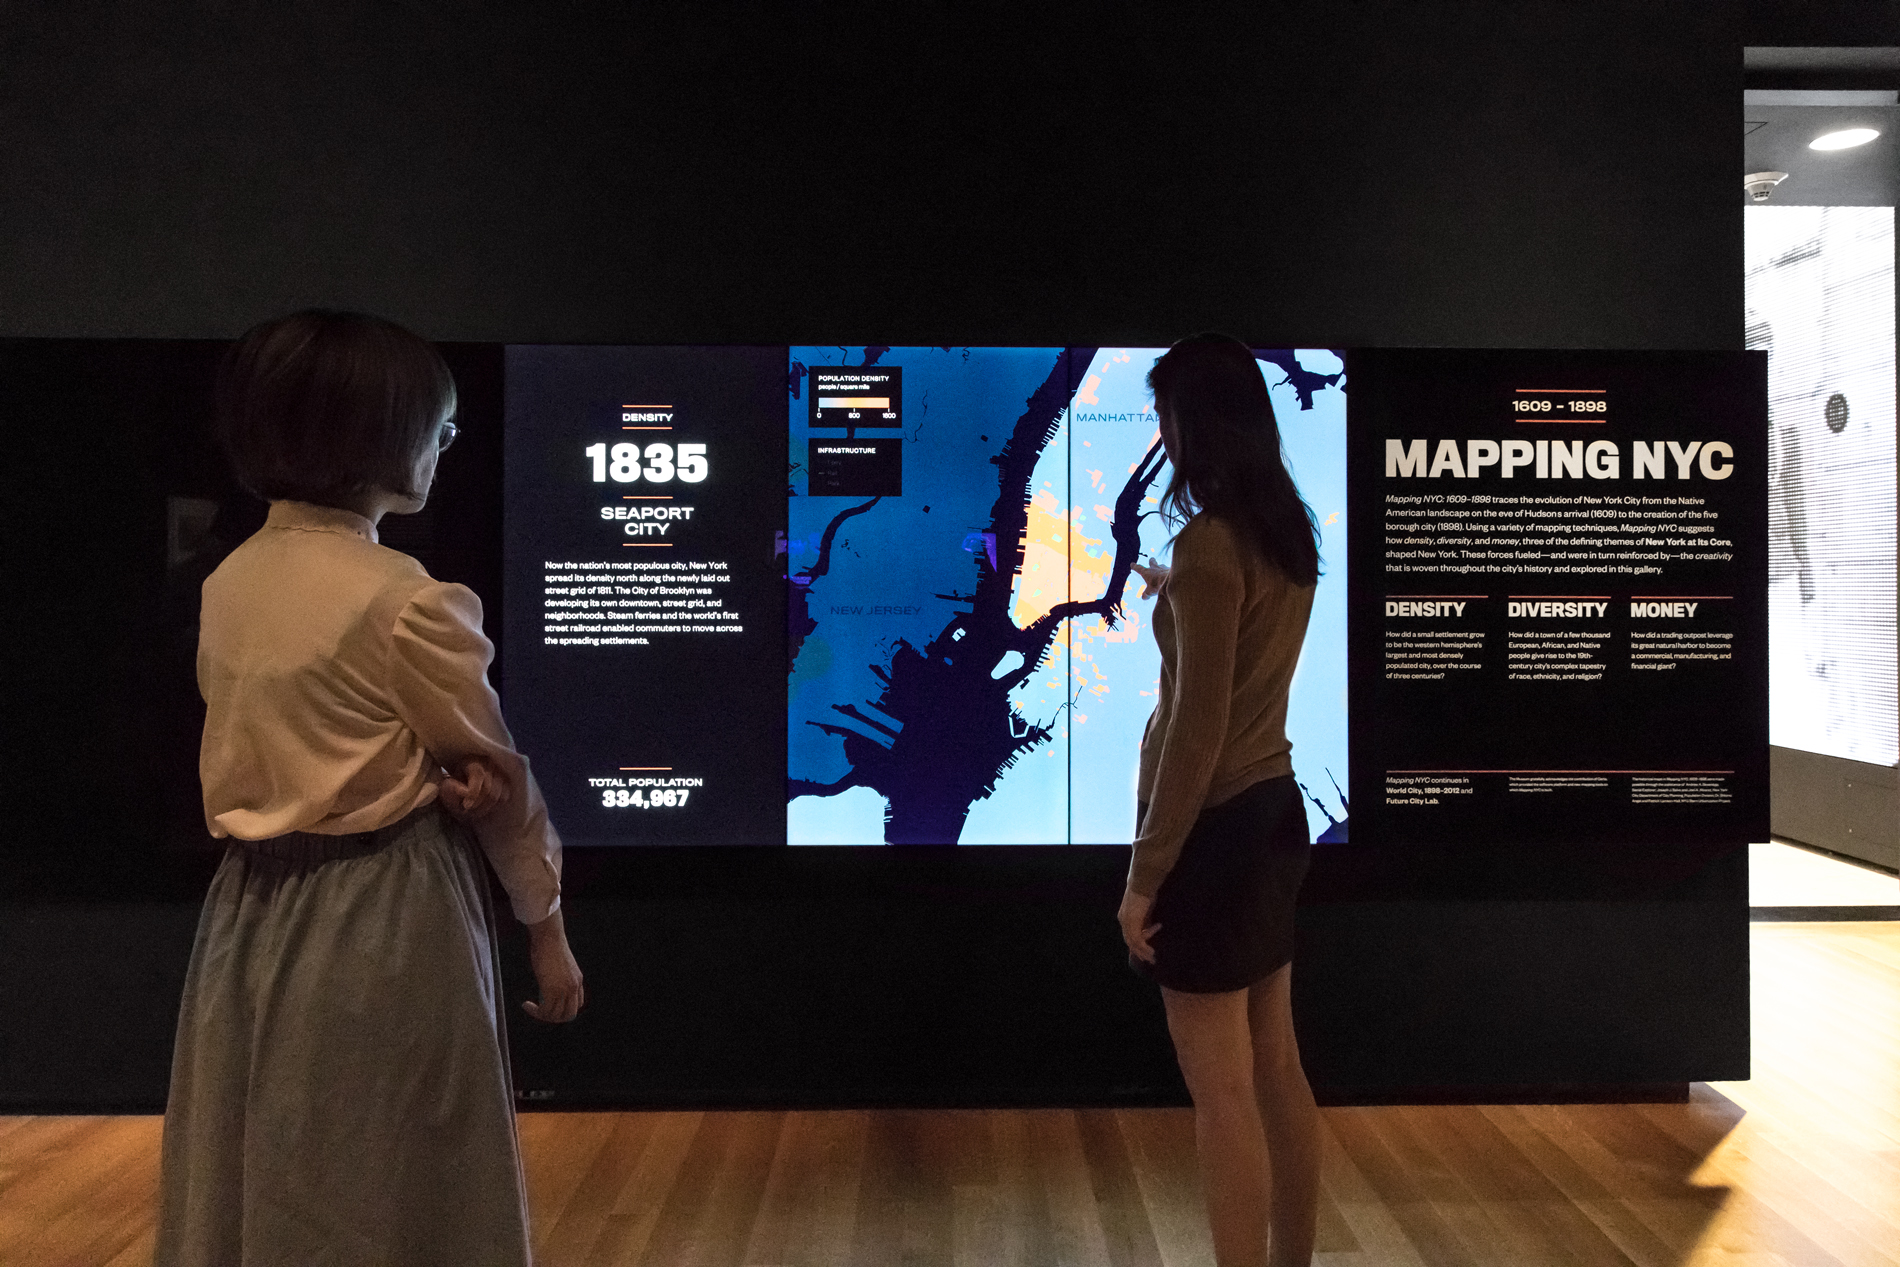 Two visitors look at a changing screen on display in a gallery